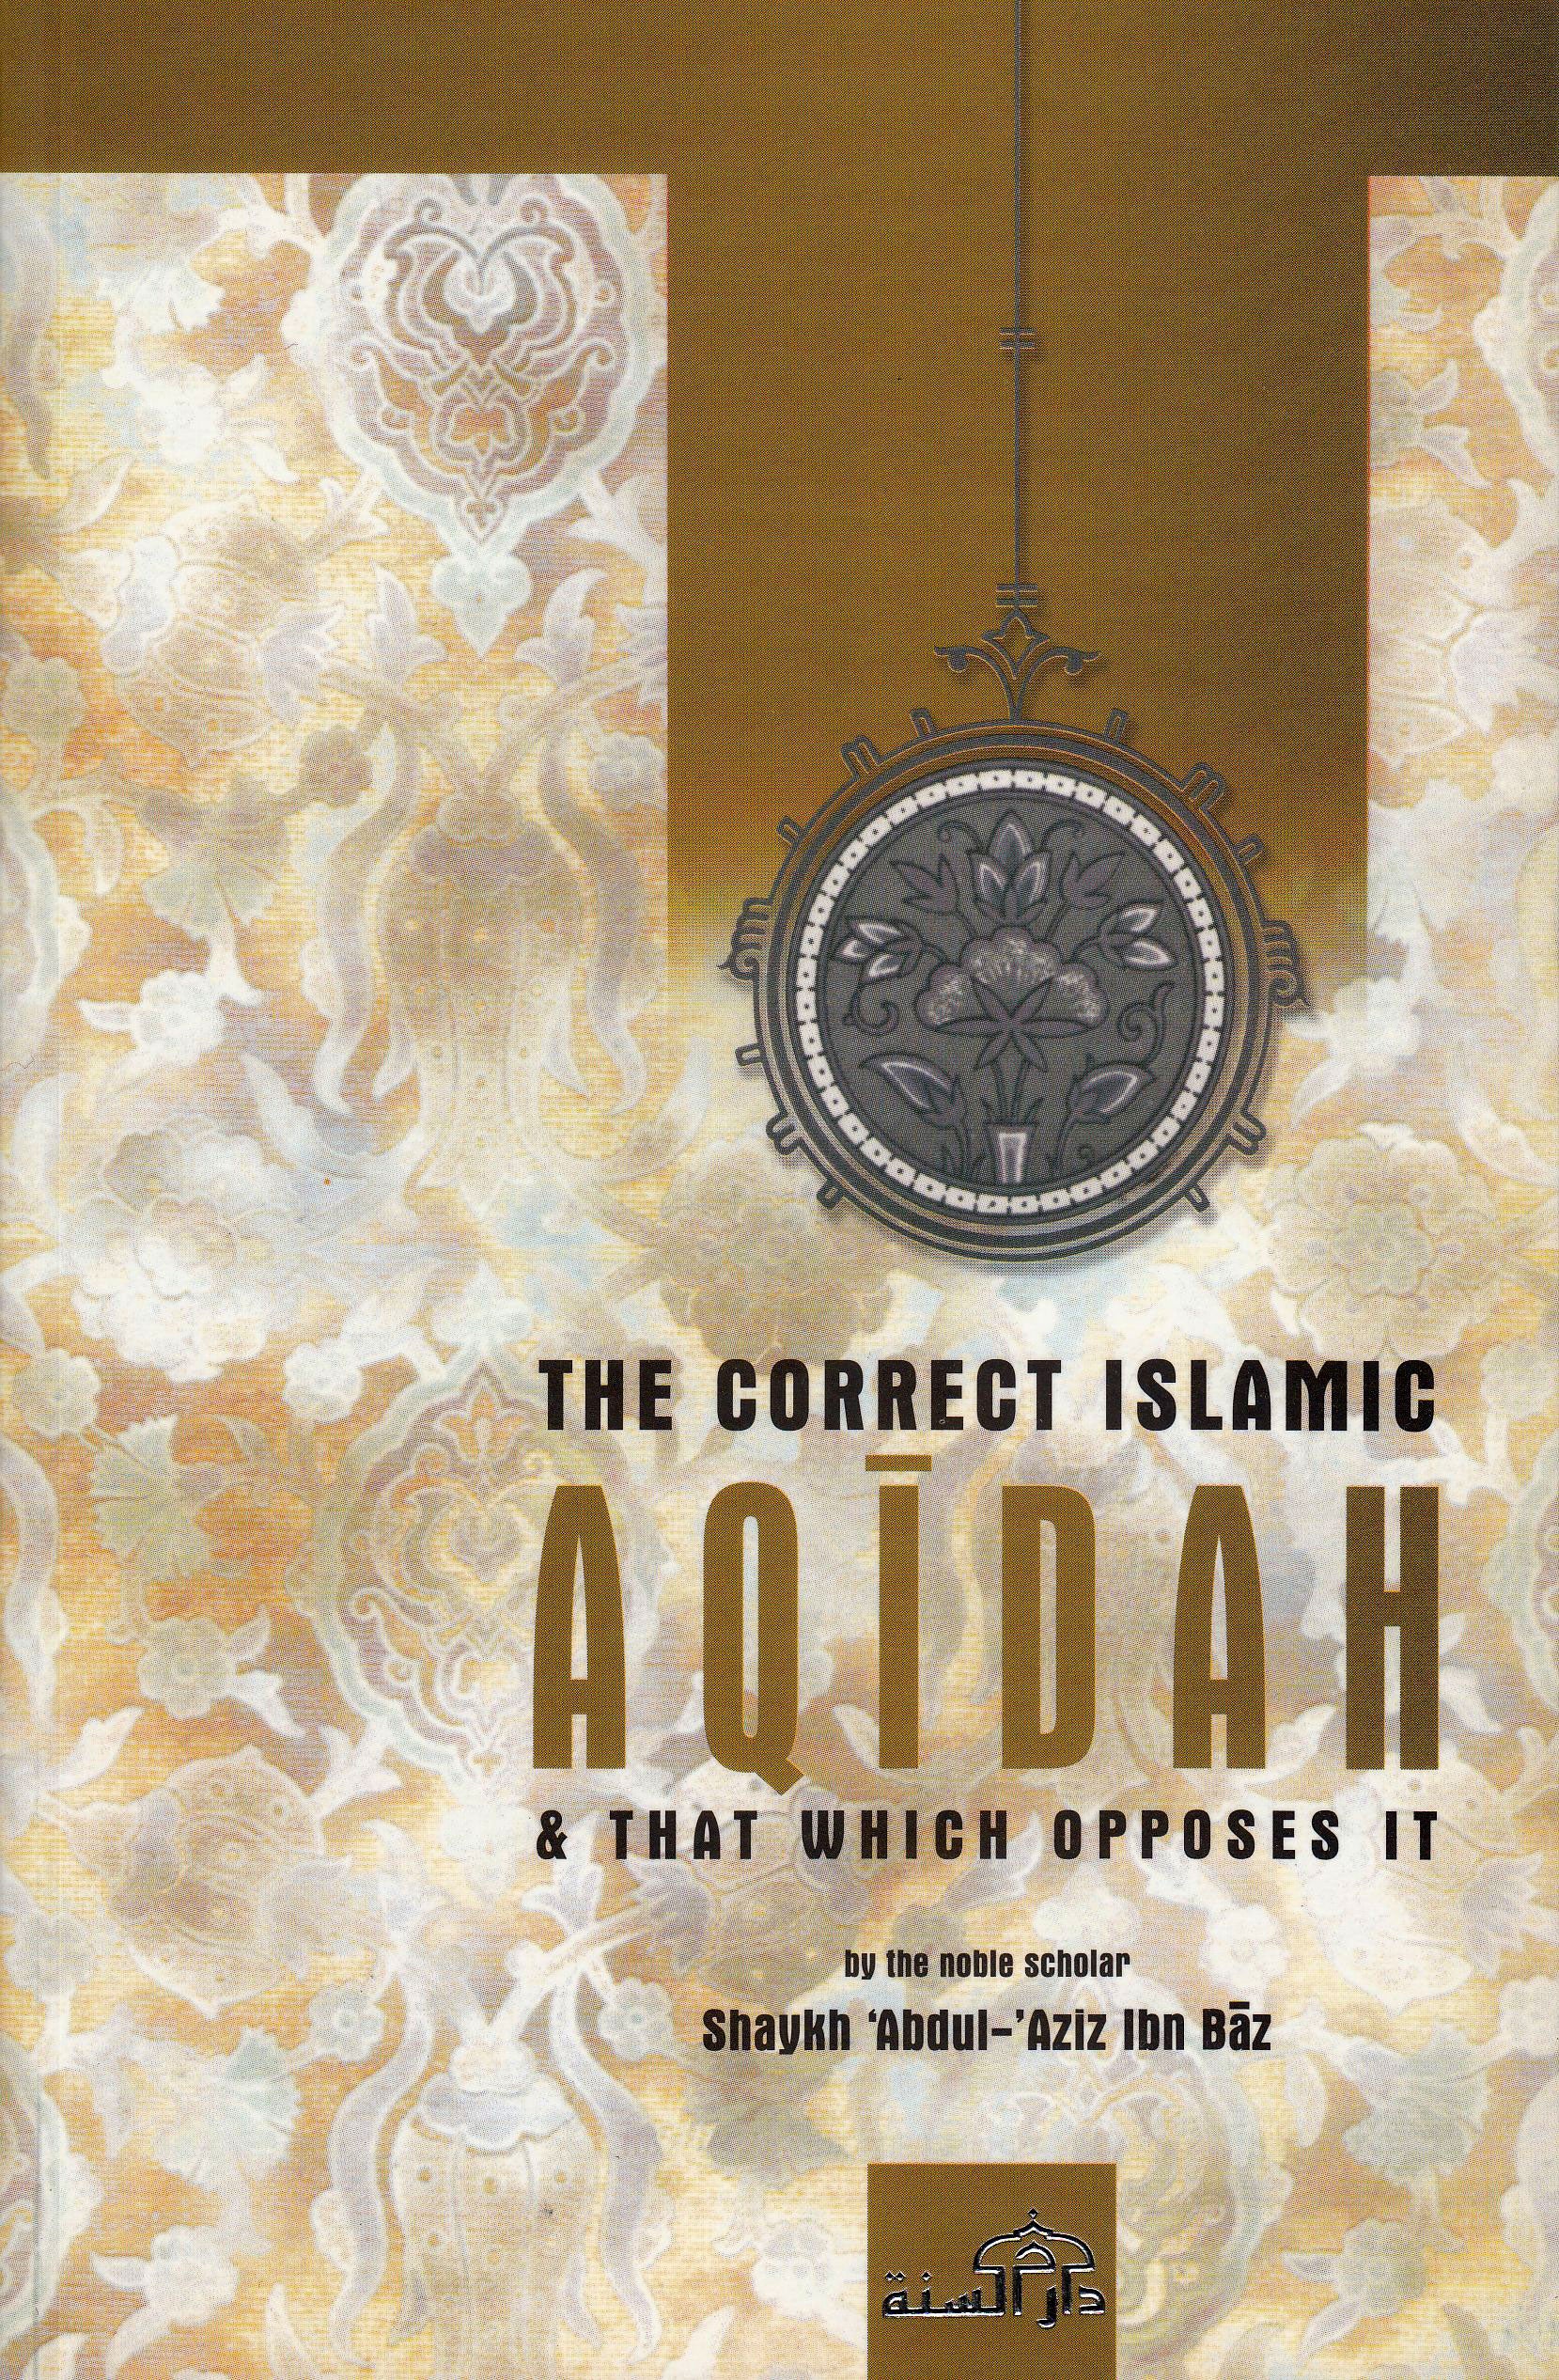 The Correct Islamic Aqidah & that which opposes it